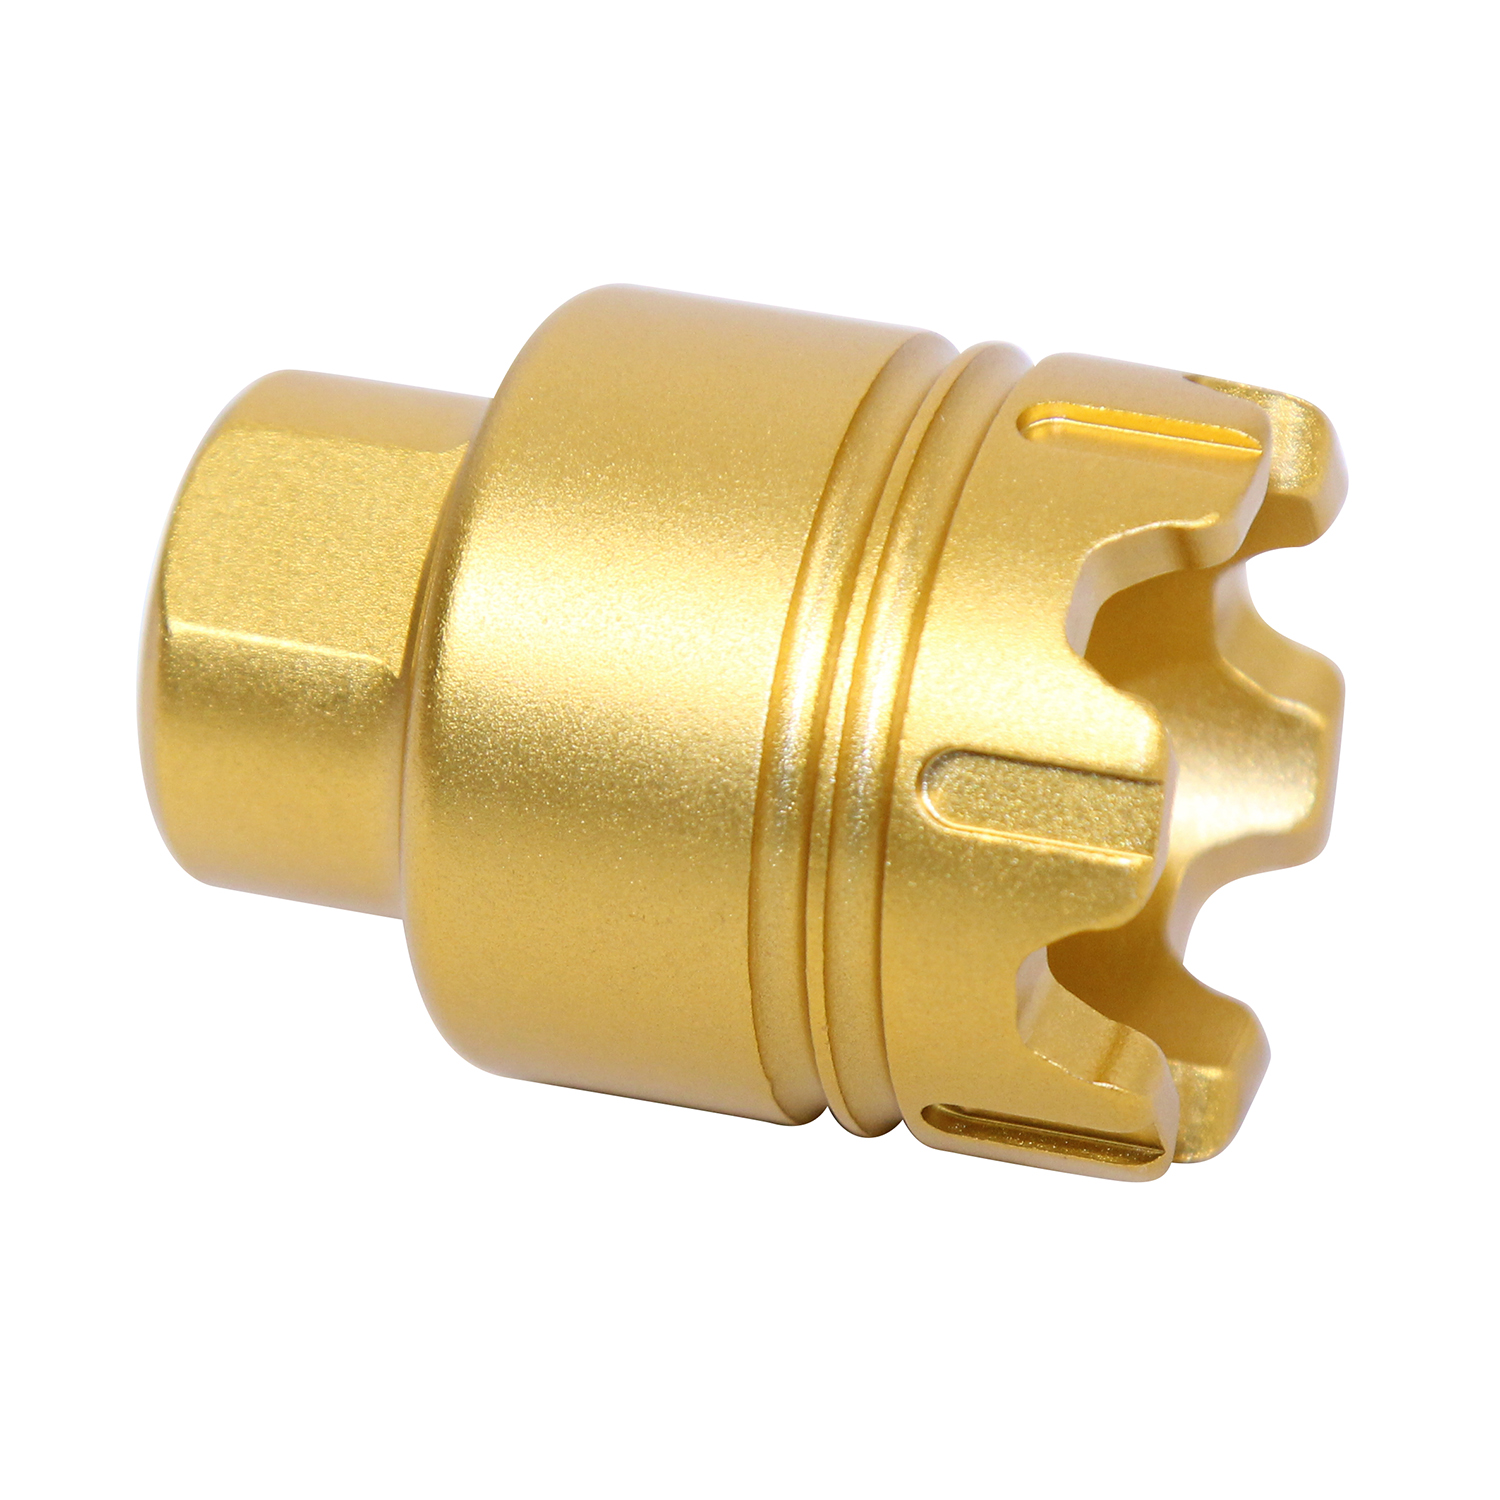 AR-15 Mini 'Trident' Flash Can With Glass Breaker (9mm) (Anodized Gold)